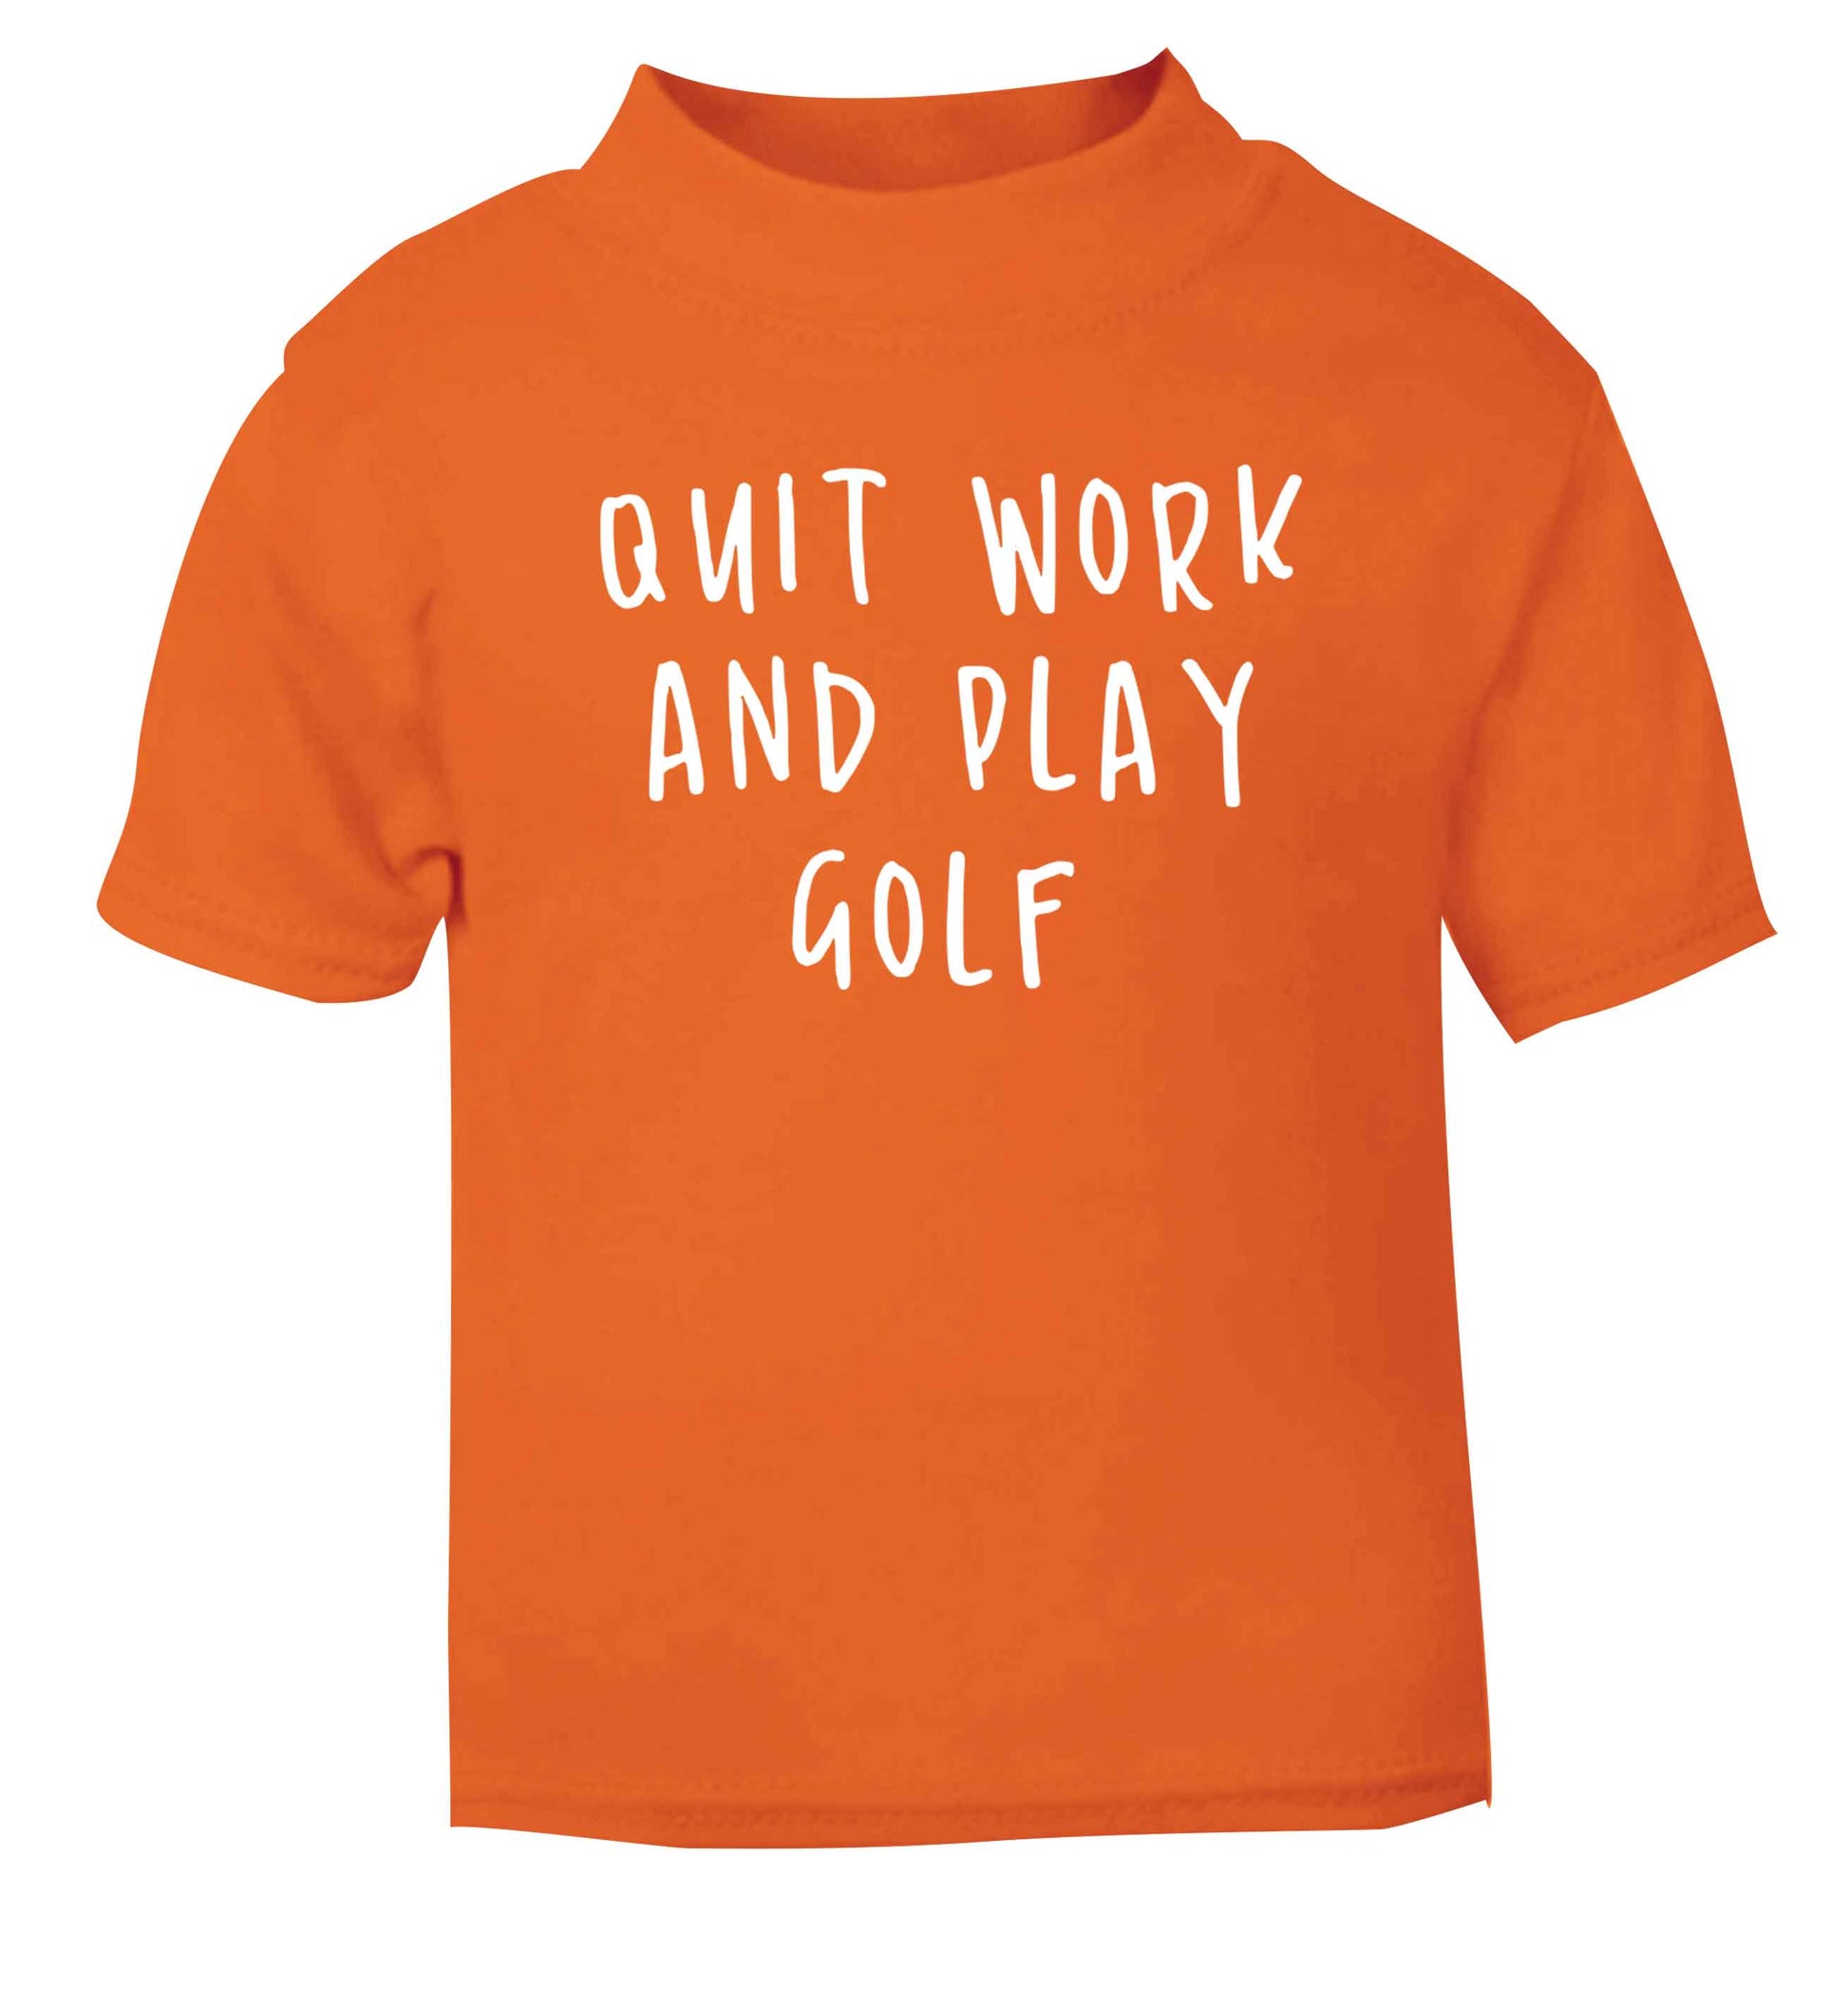 Quit work and play golf orange Baby Toddler Tshirt 2 Years